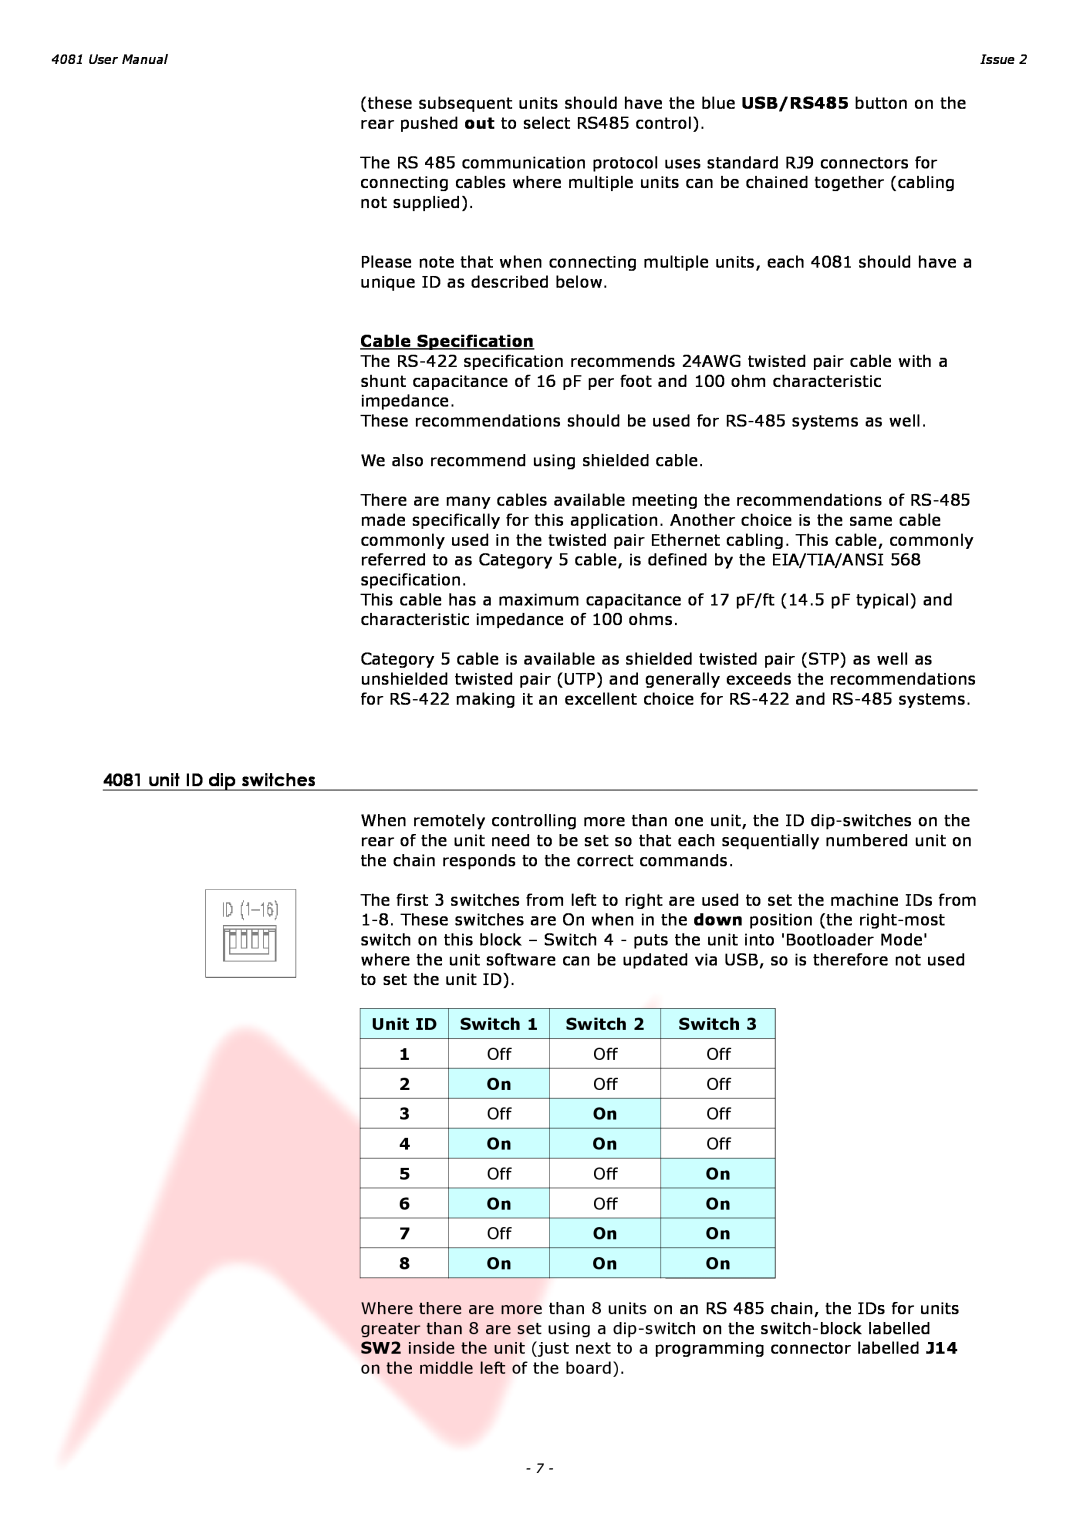 AMS 4081 user manual unit ID dip switches 